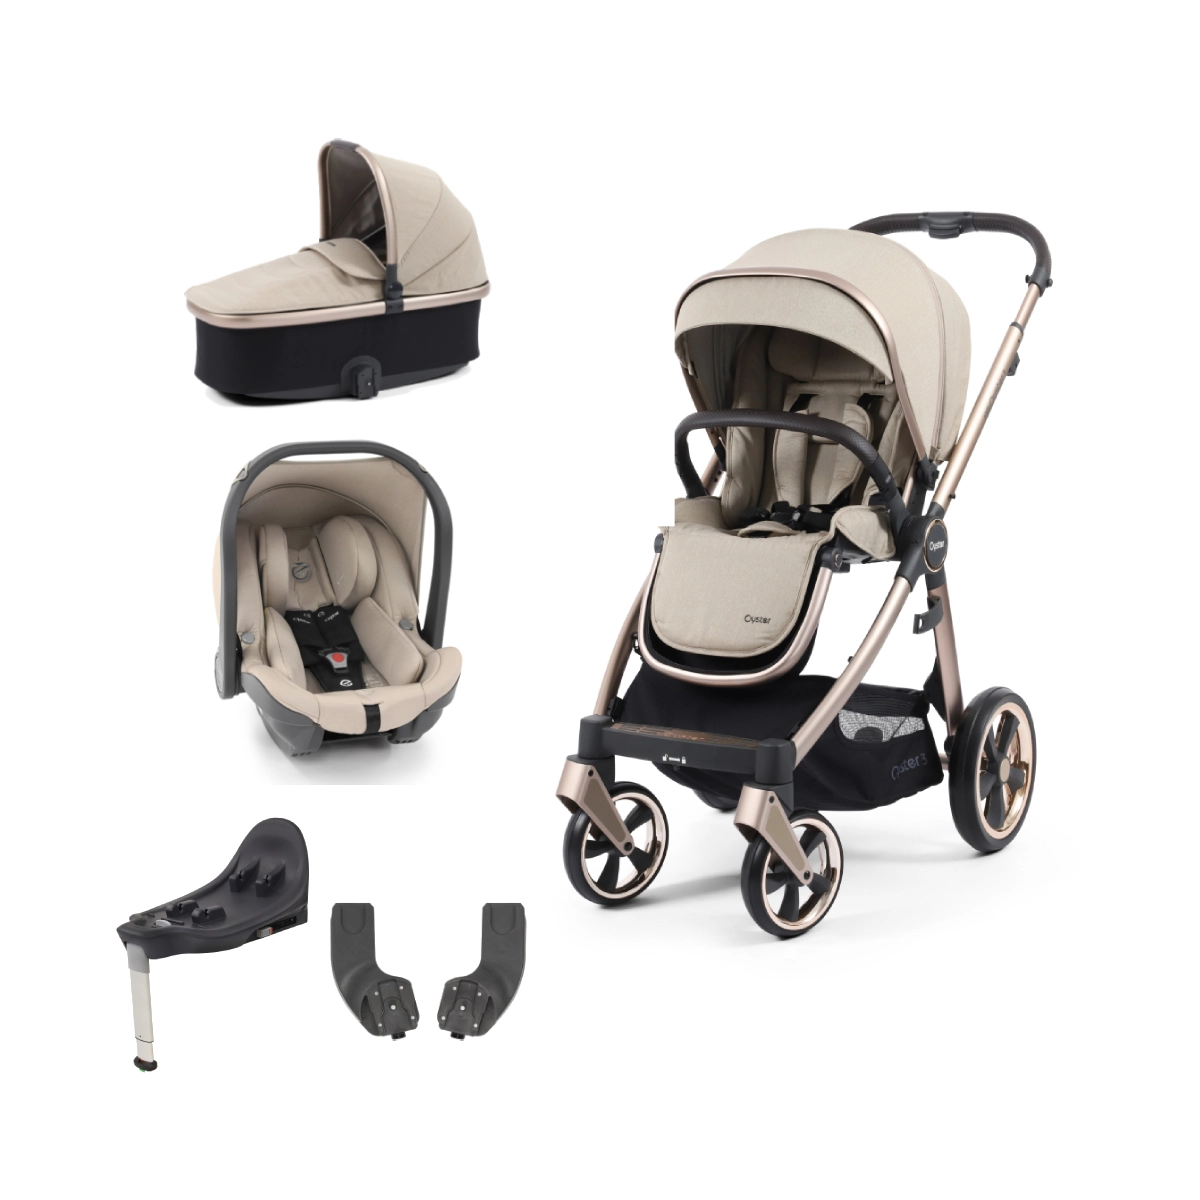 BabyStyle Oyster 3 Champagne Chassis Essential Capsule Travel System